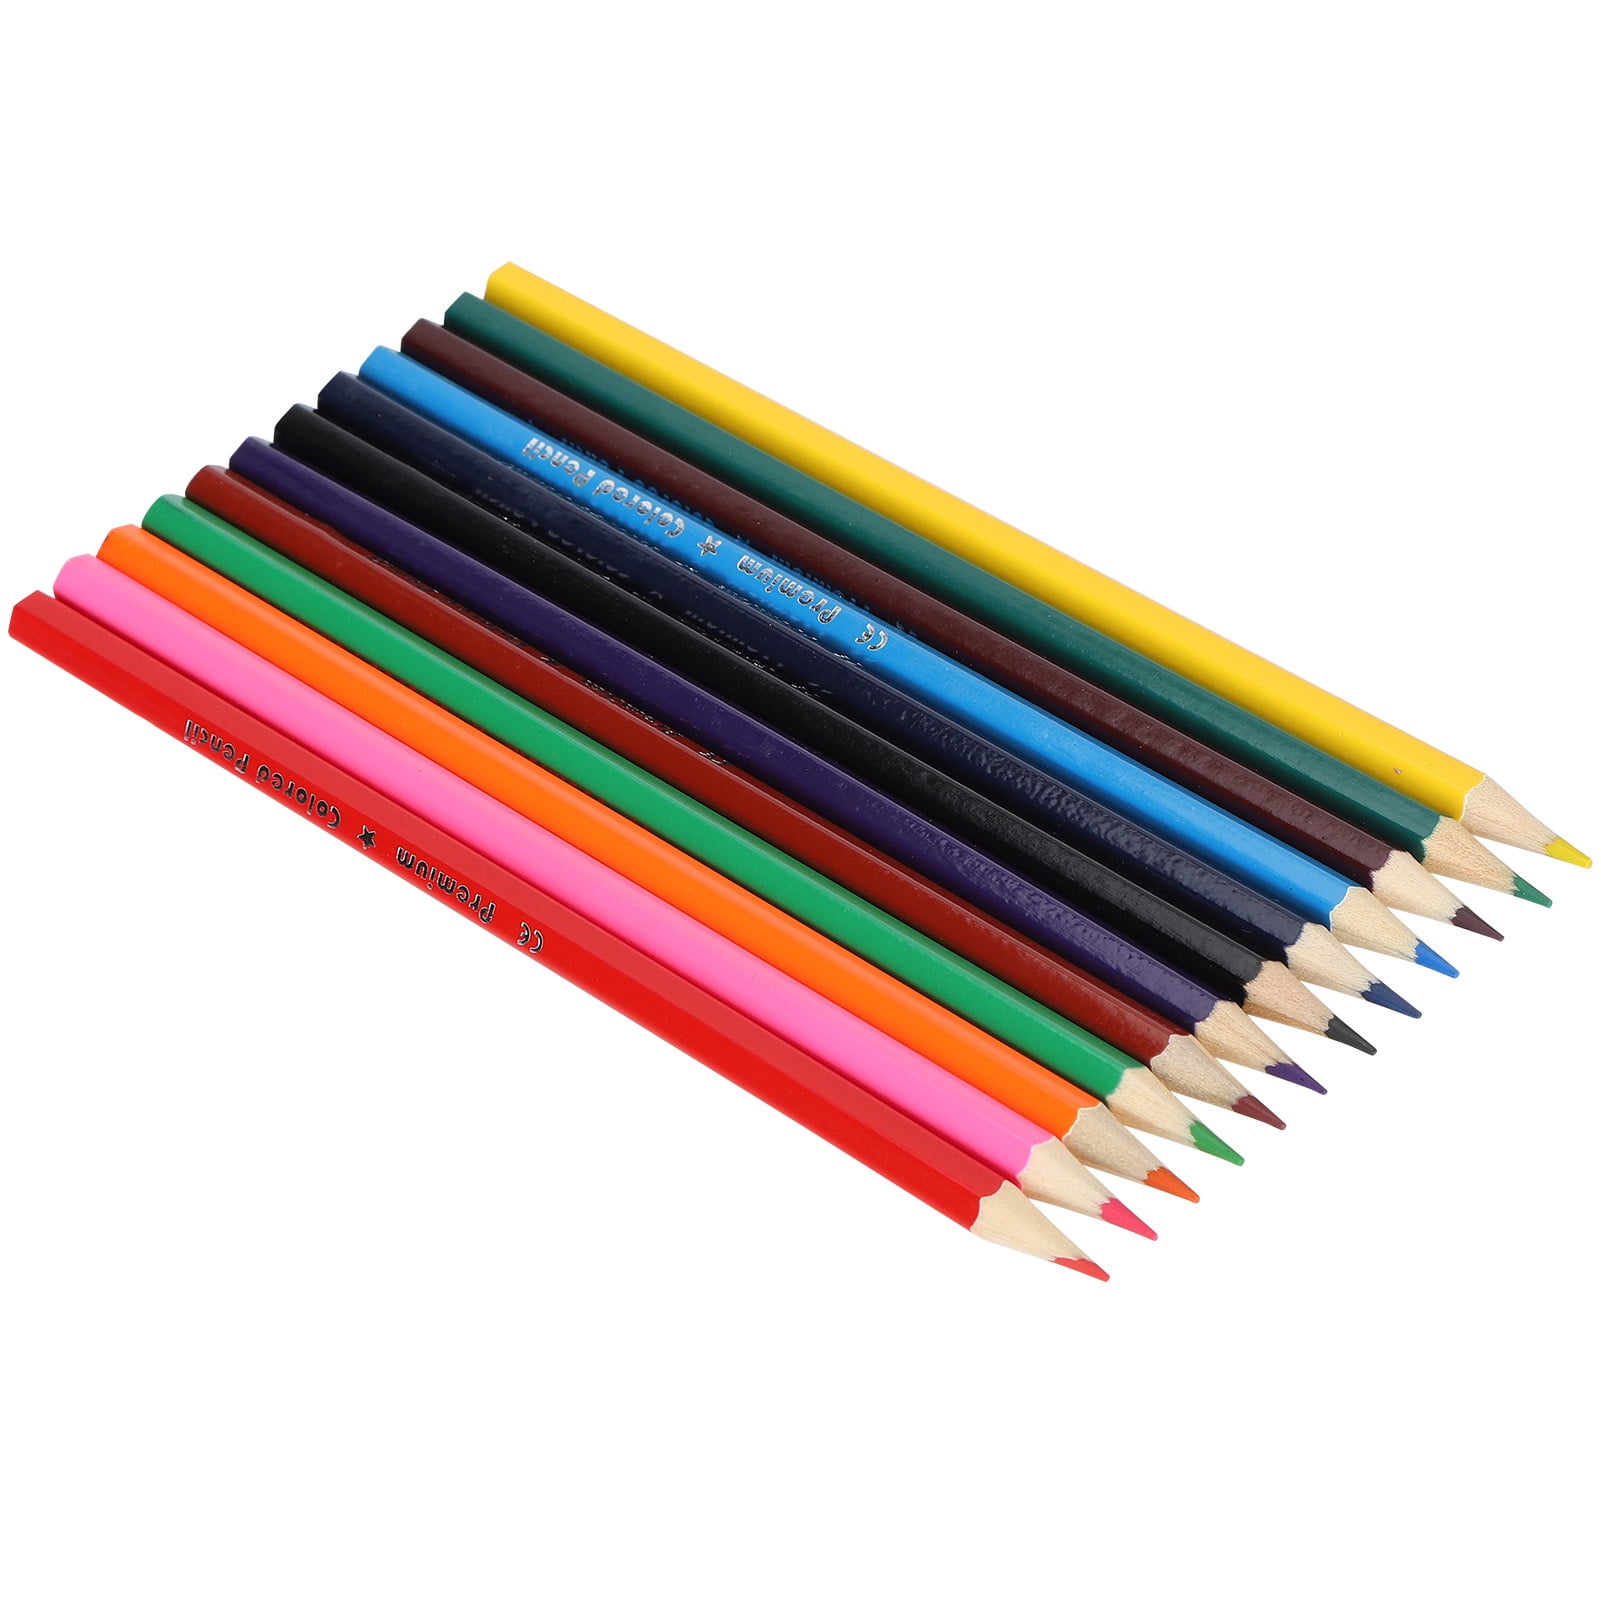 The Best Earth-Friendly Colored Pencils –